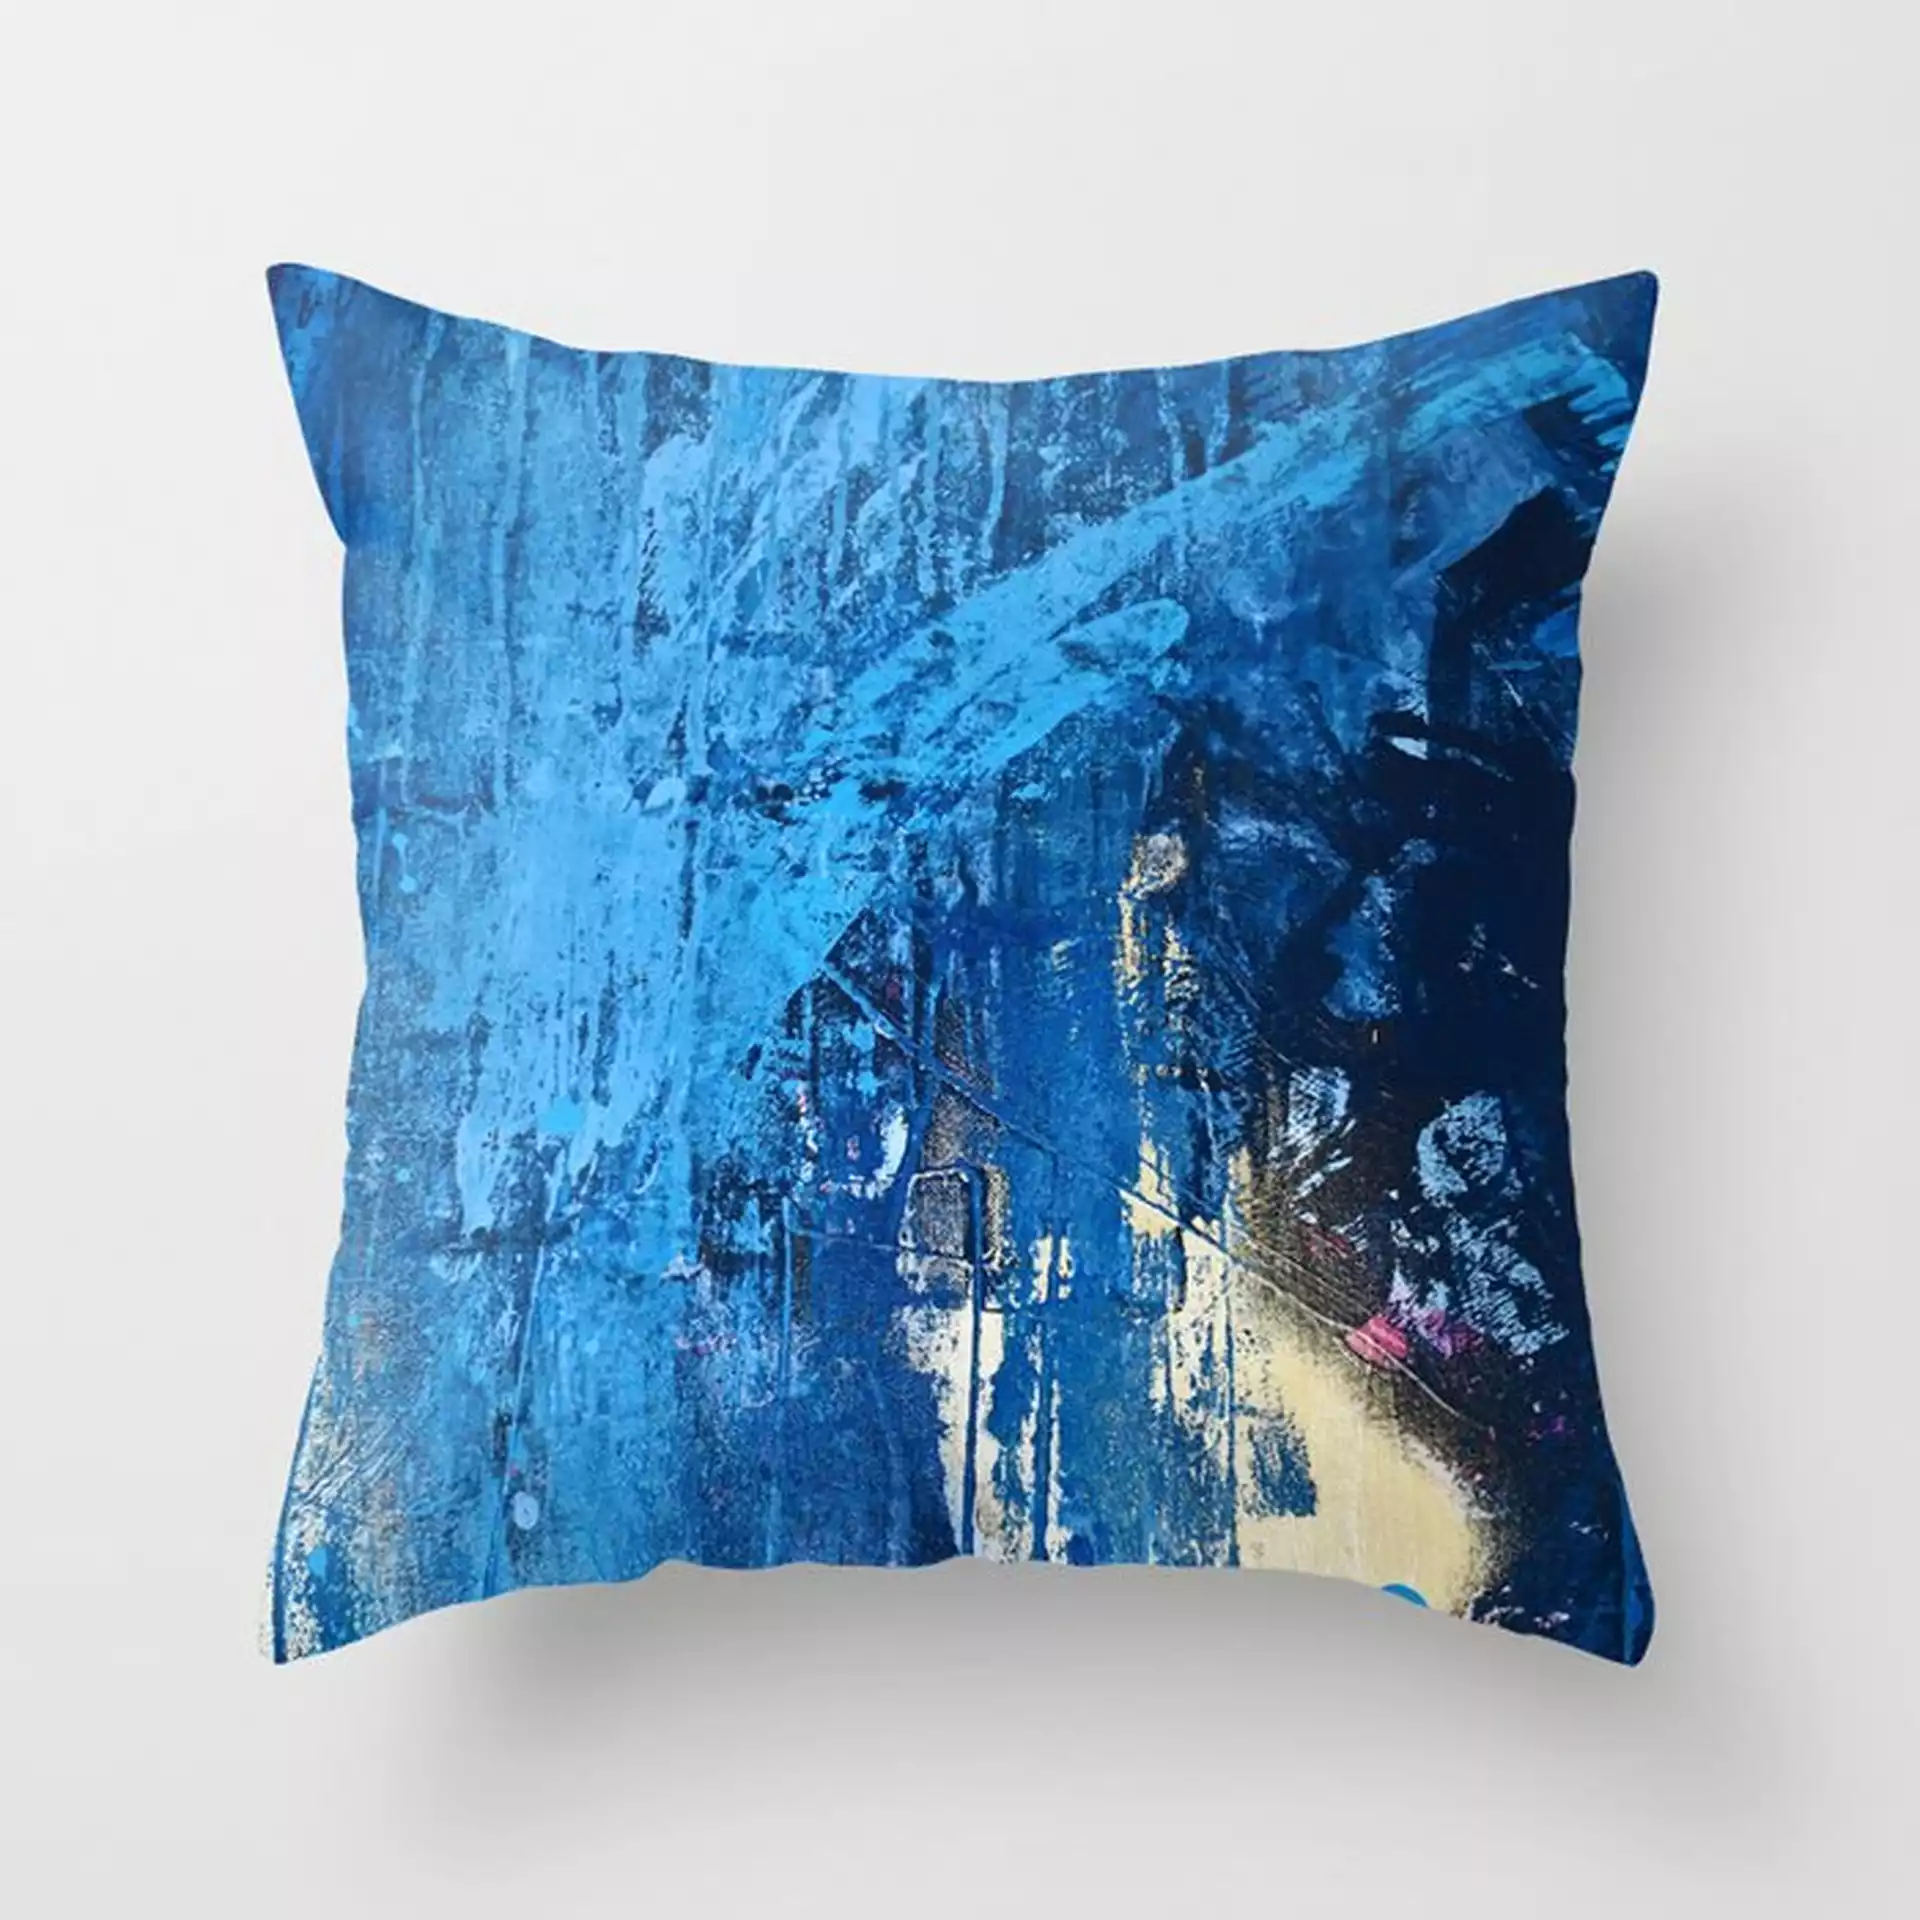 Vortex [2]: A Vibrant Abstract Mixed-media Piece In Blue And Gold By Alyssa Hamilton Art Couch Throw Pillow by Alyssa Hamilton Art - Cover (16" x 16") with pillow insert - Outdoor Pillow